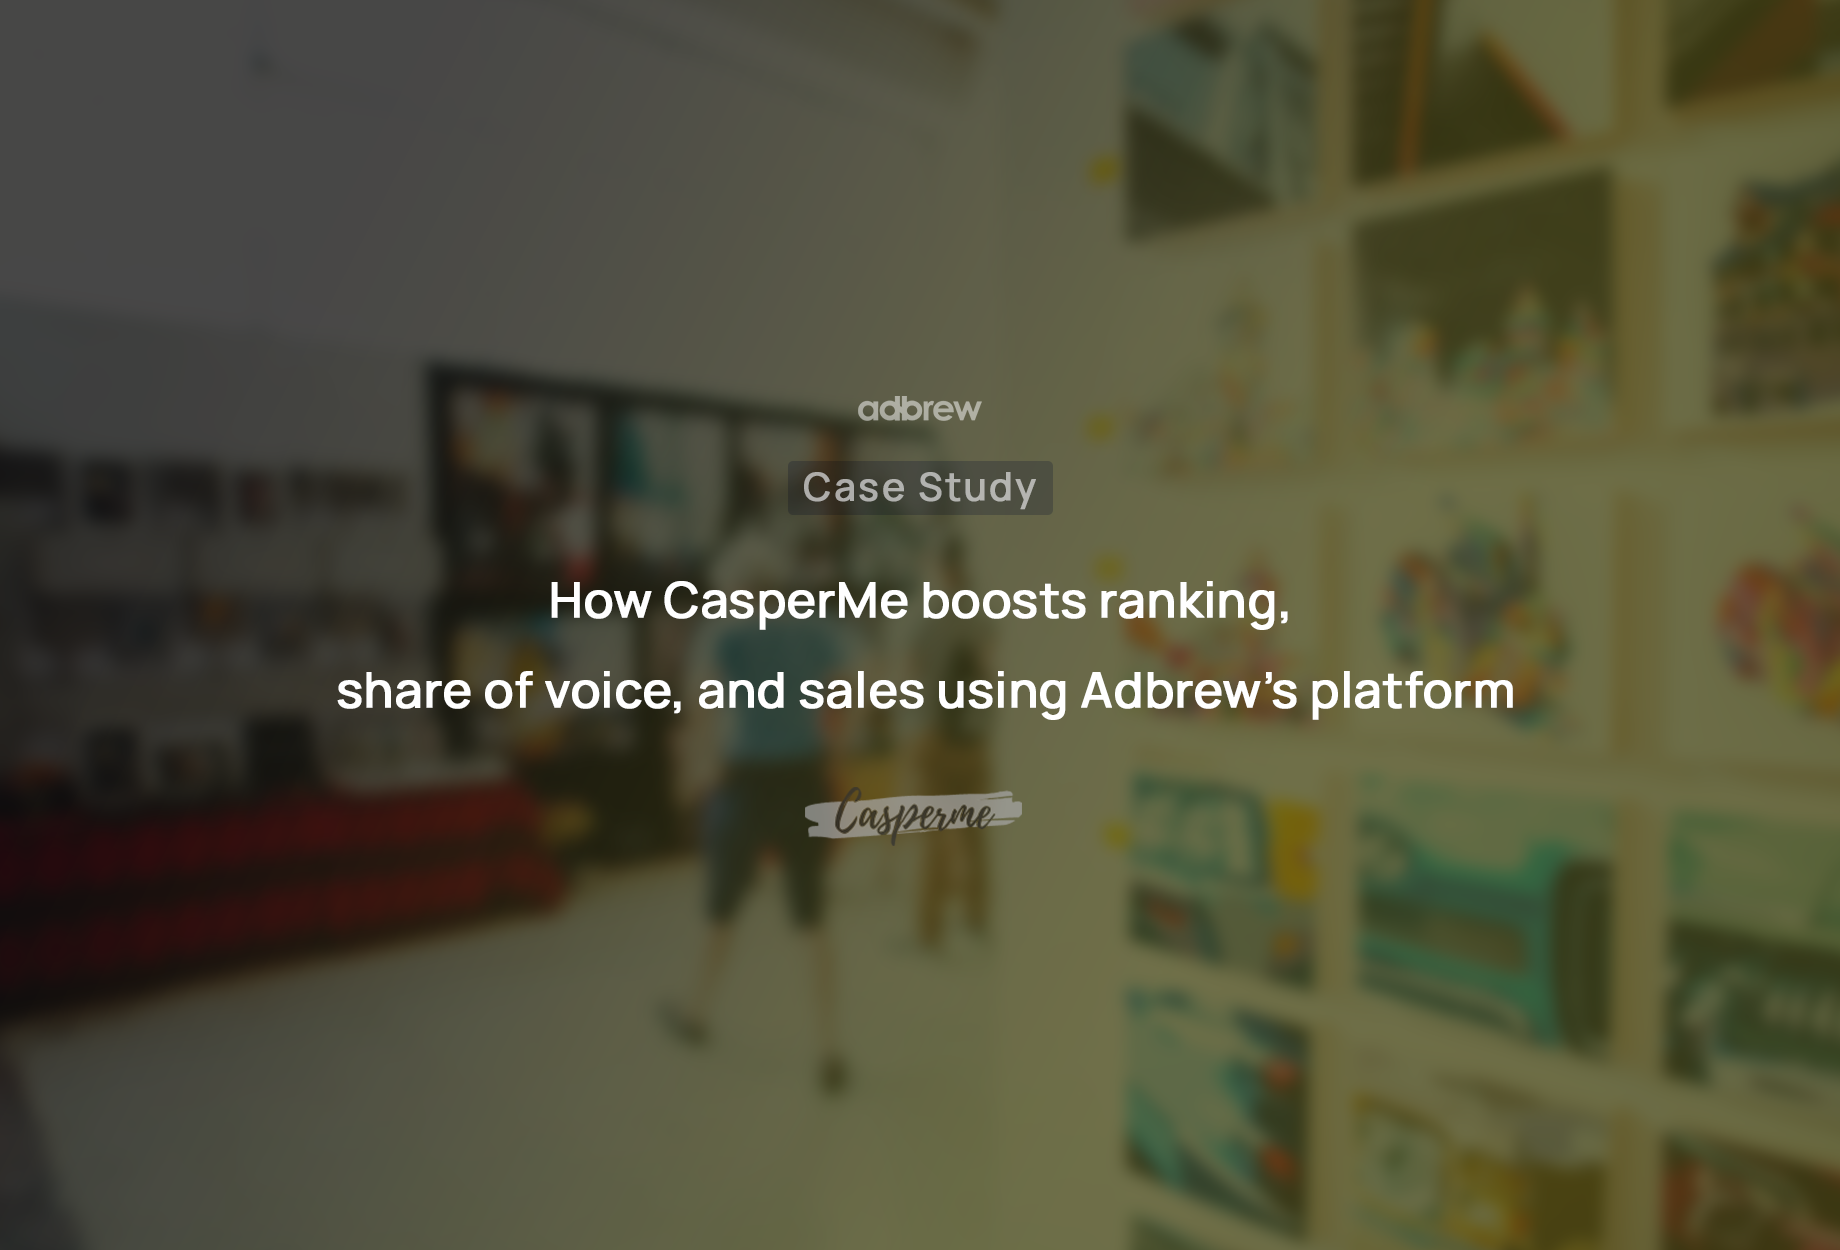 How CasperMe boosts ranking, share of voice, and sales using Adbrew’s platform